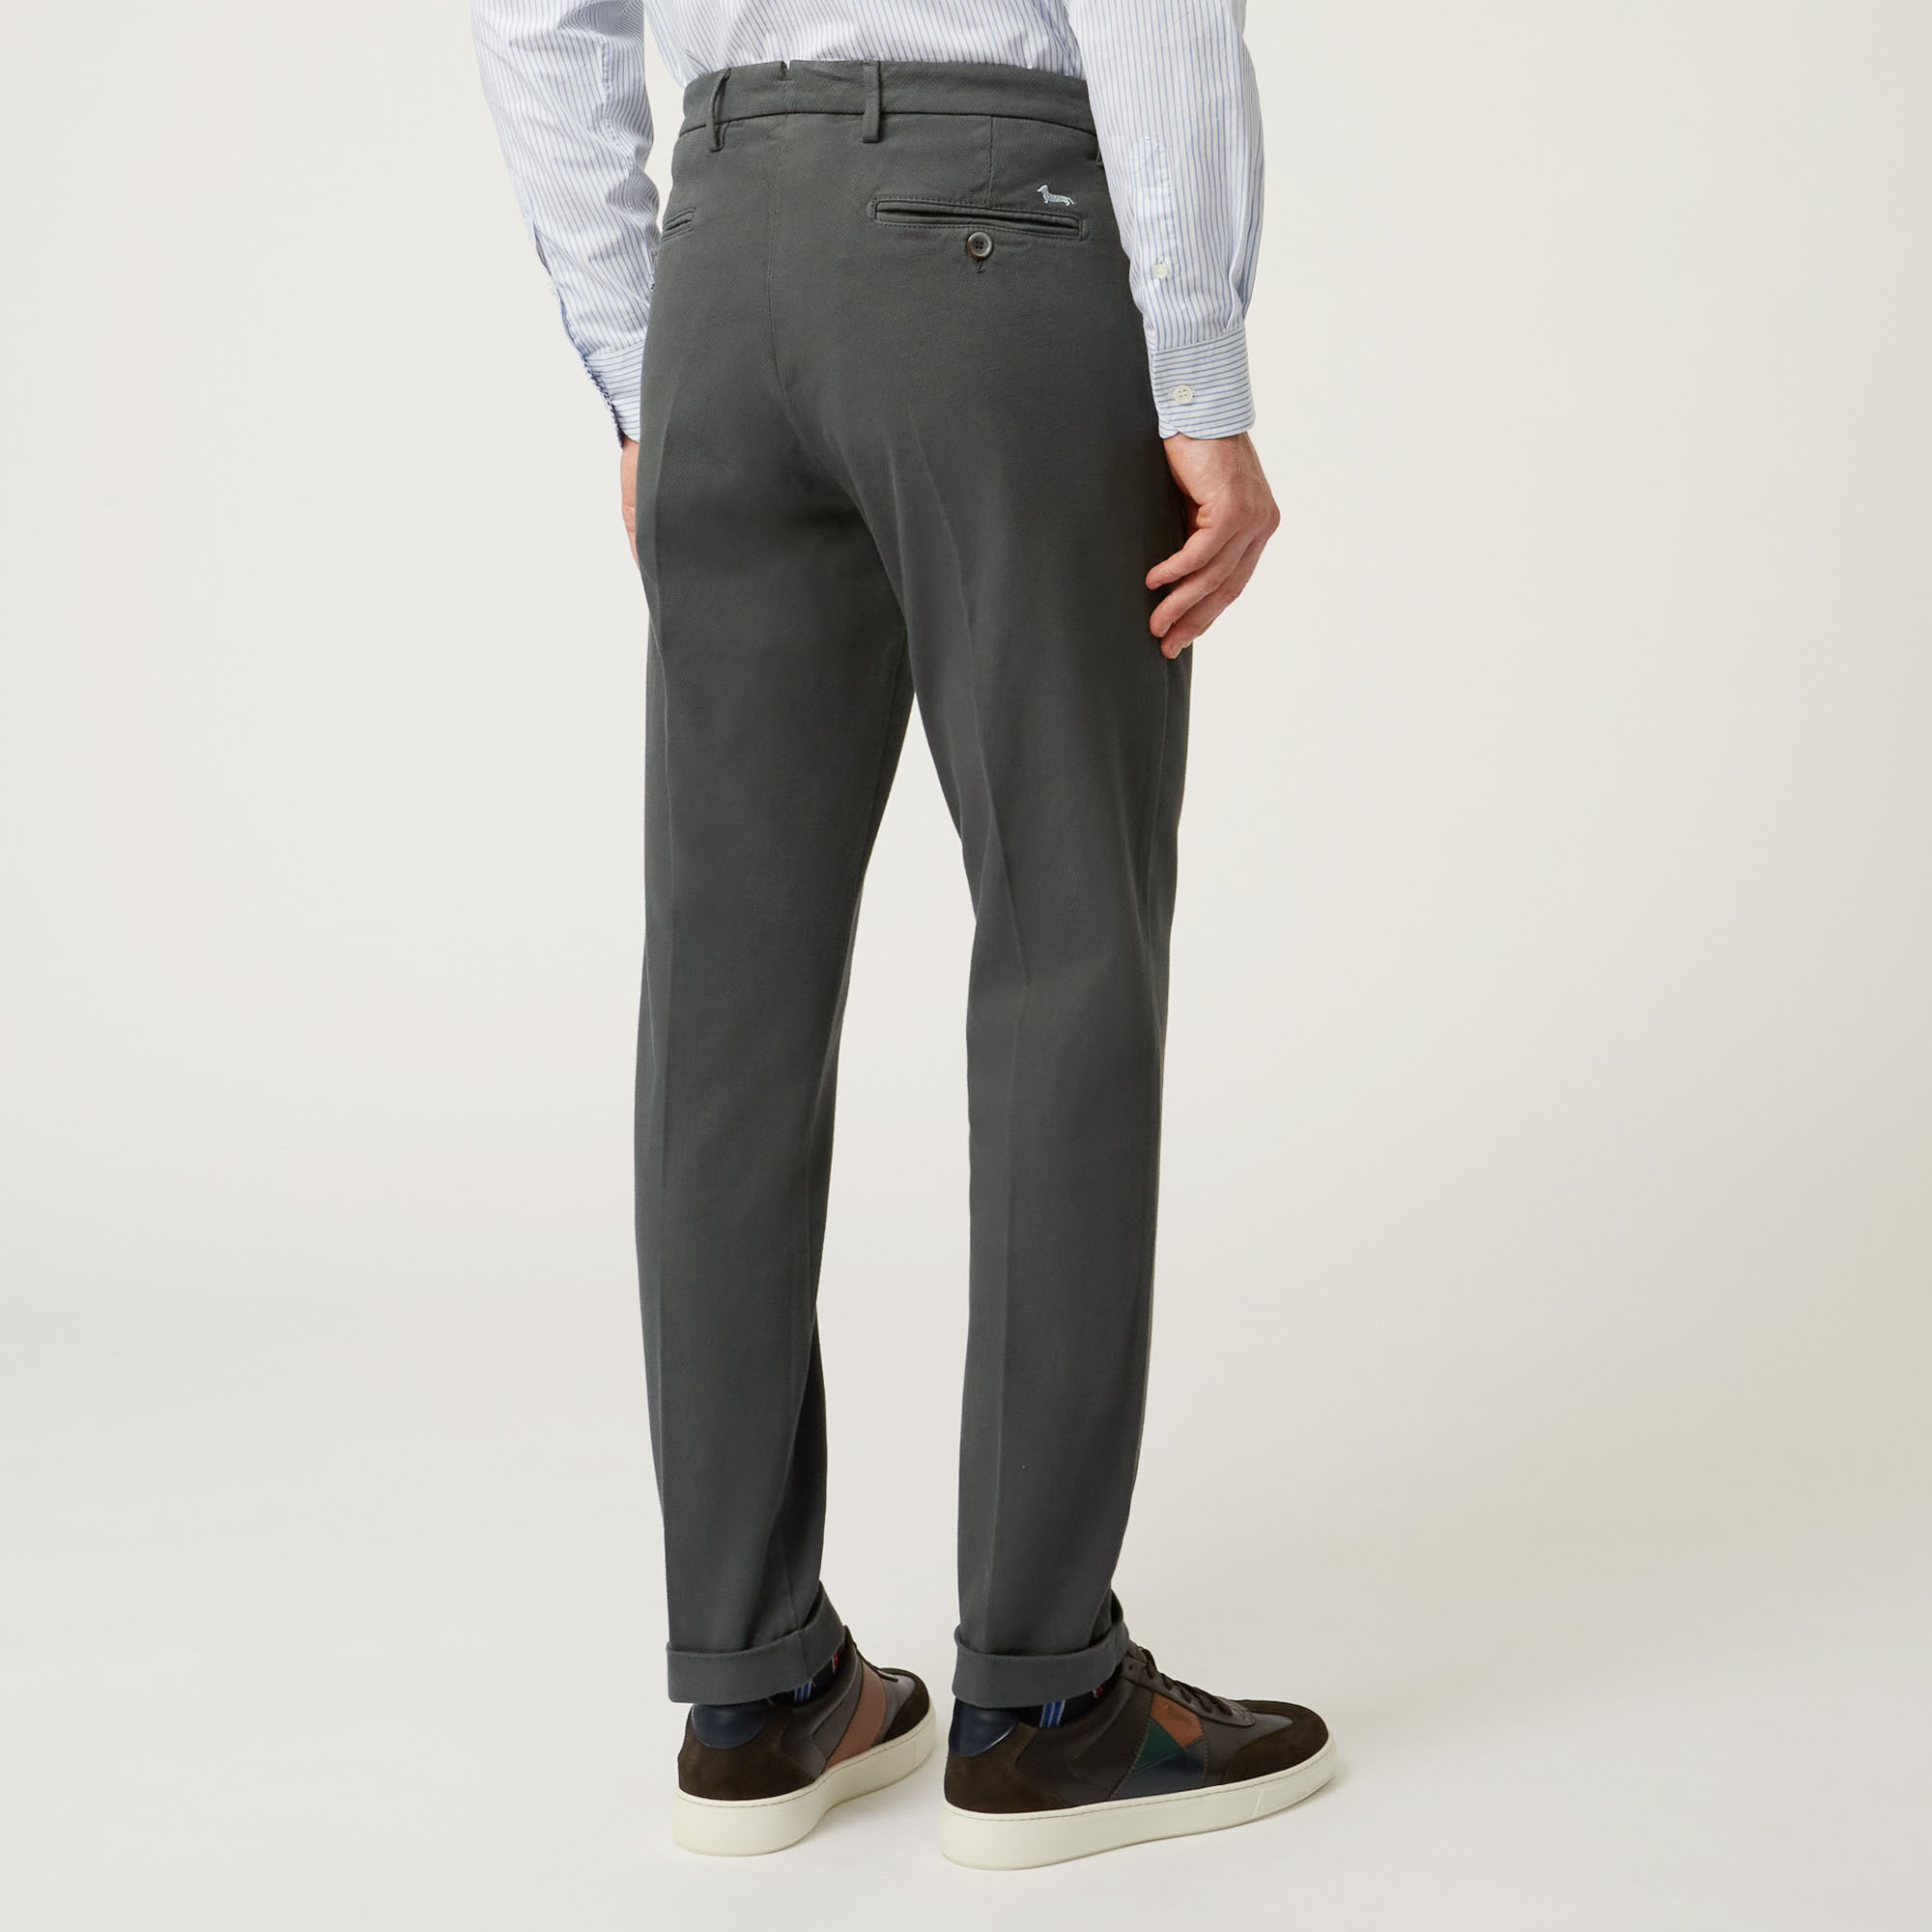 Pantalone In Cotone Stretch, Grigio, large image number 1